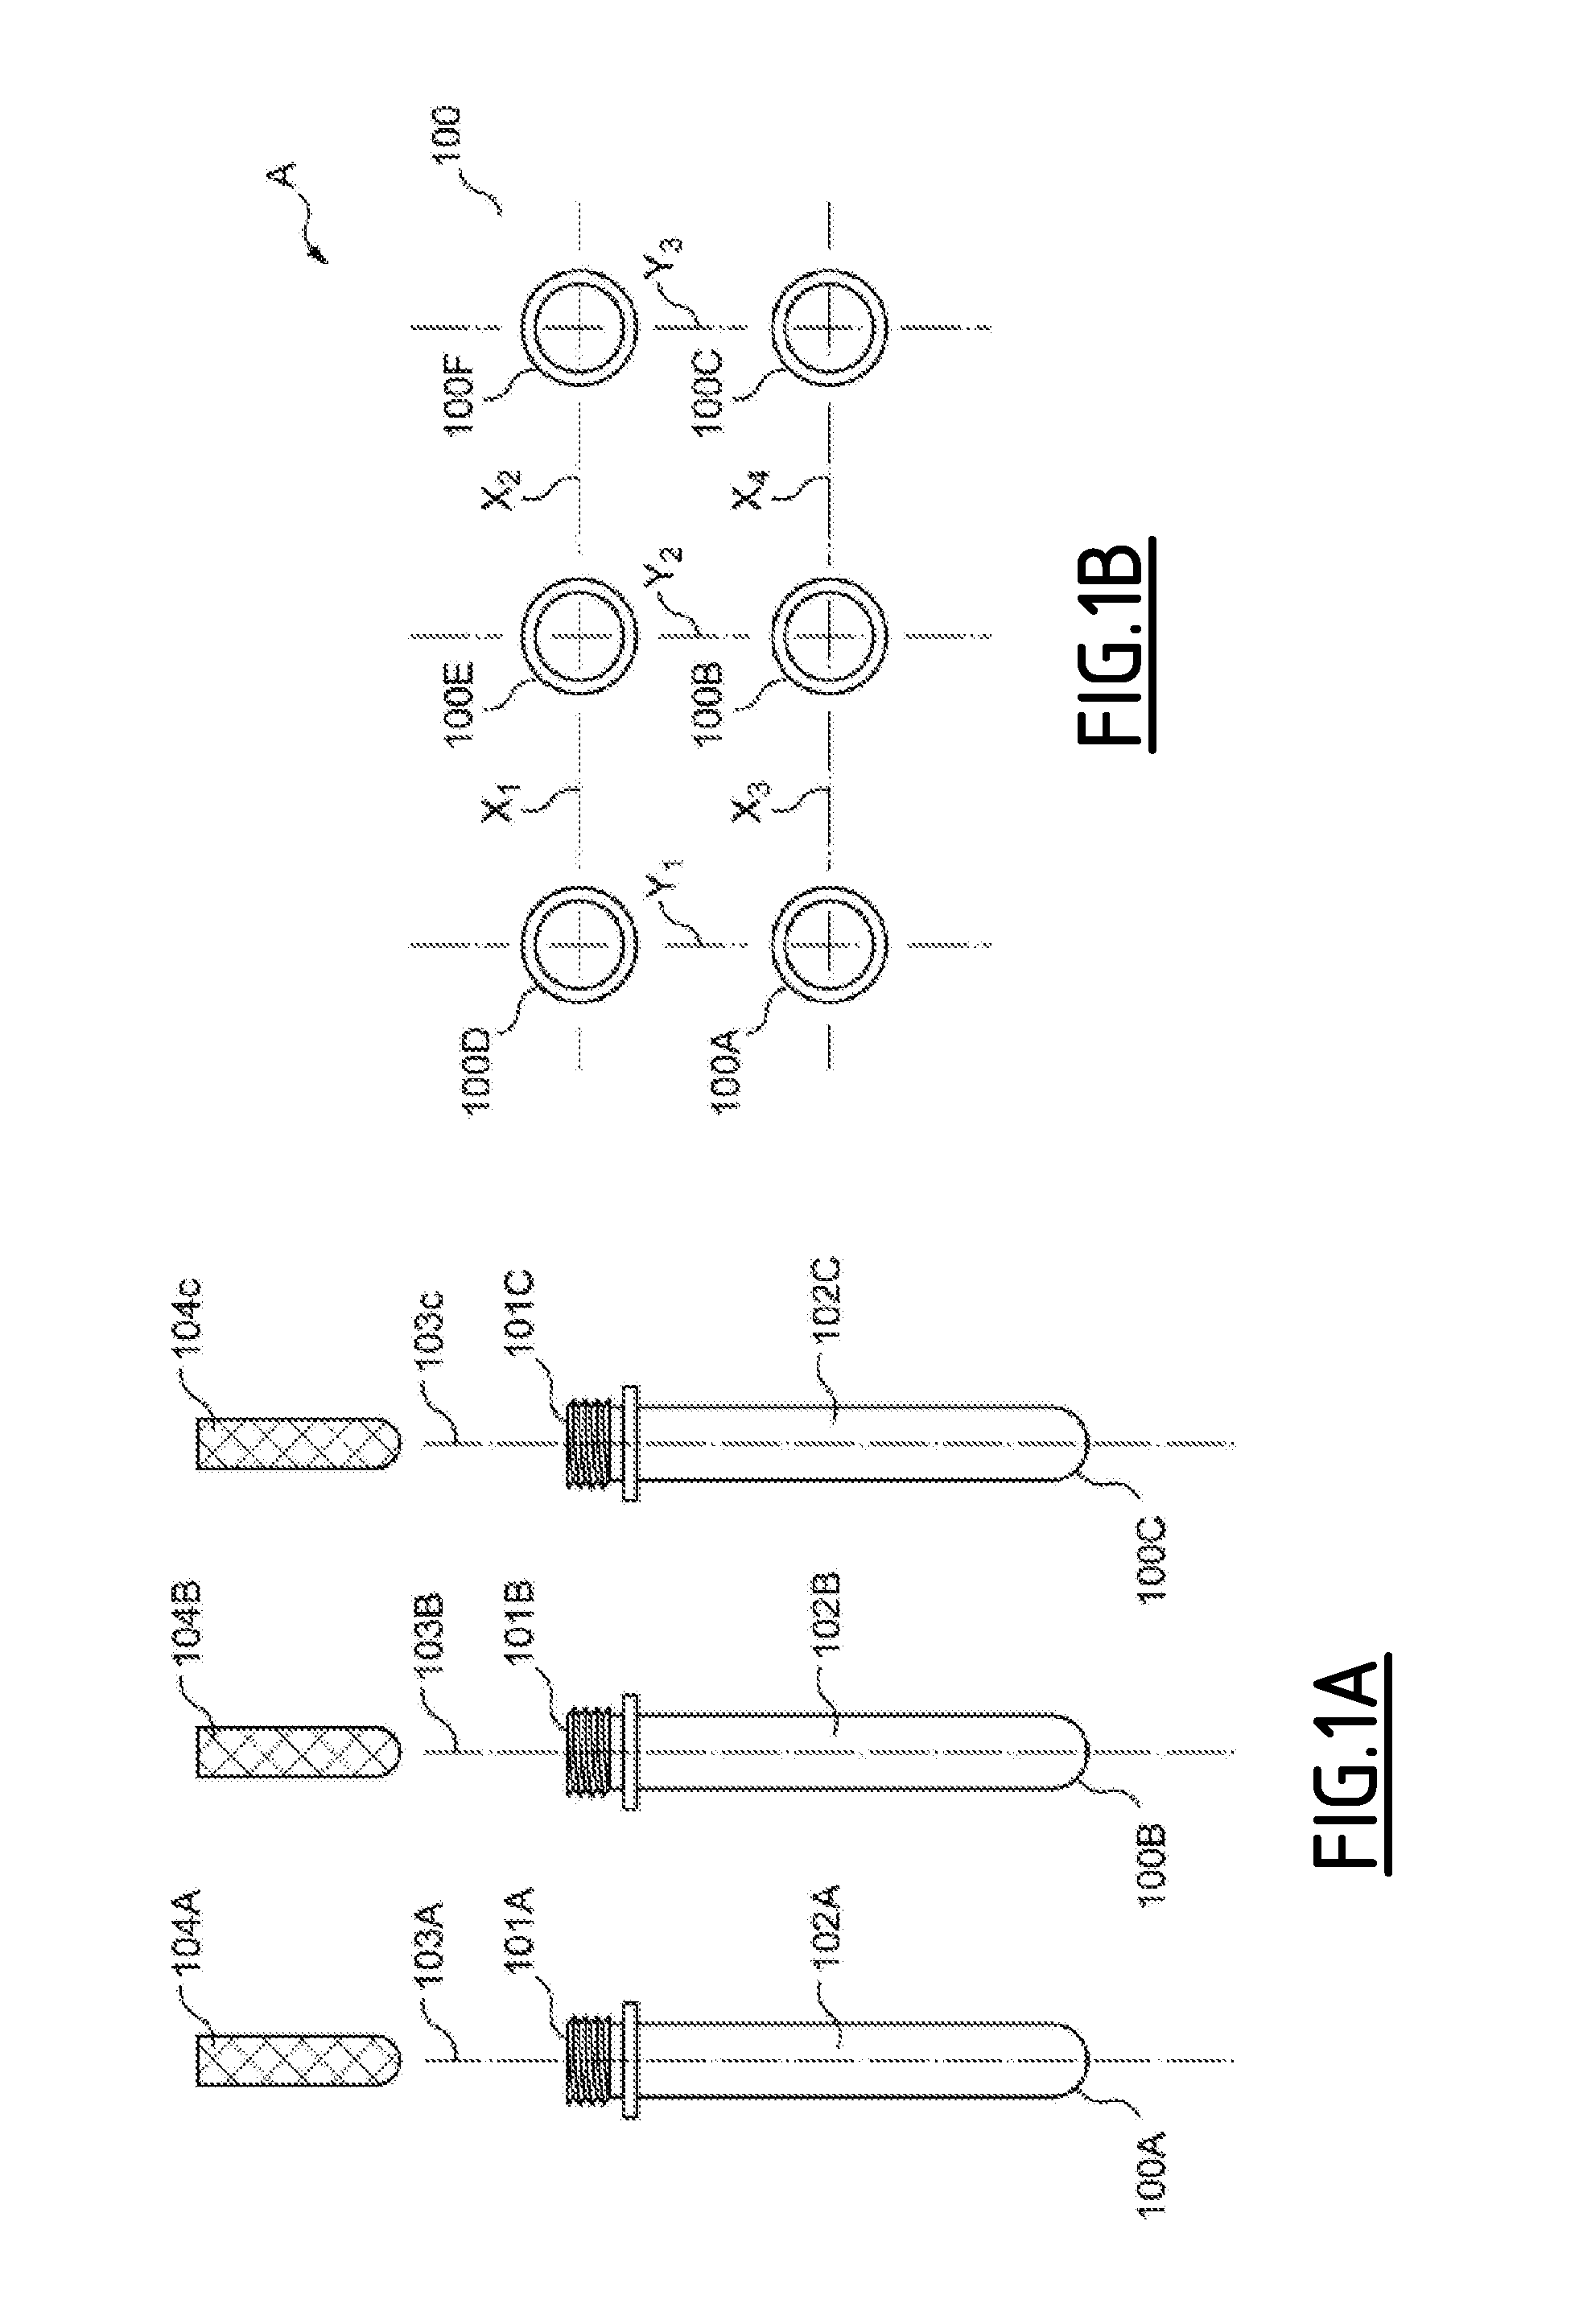 A method and apparatus for fabricating containers